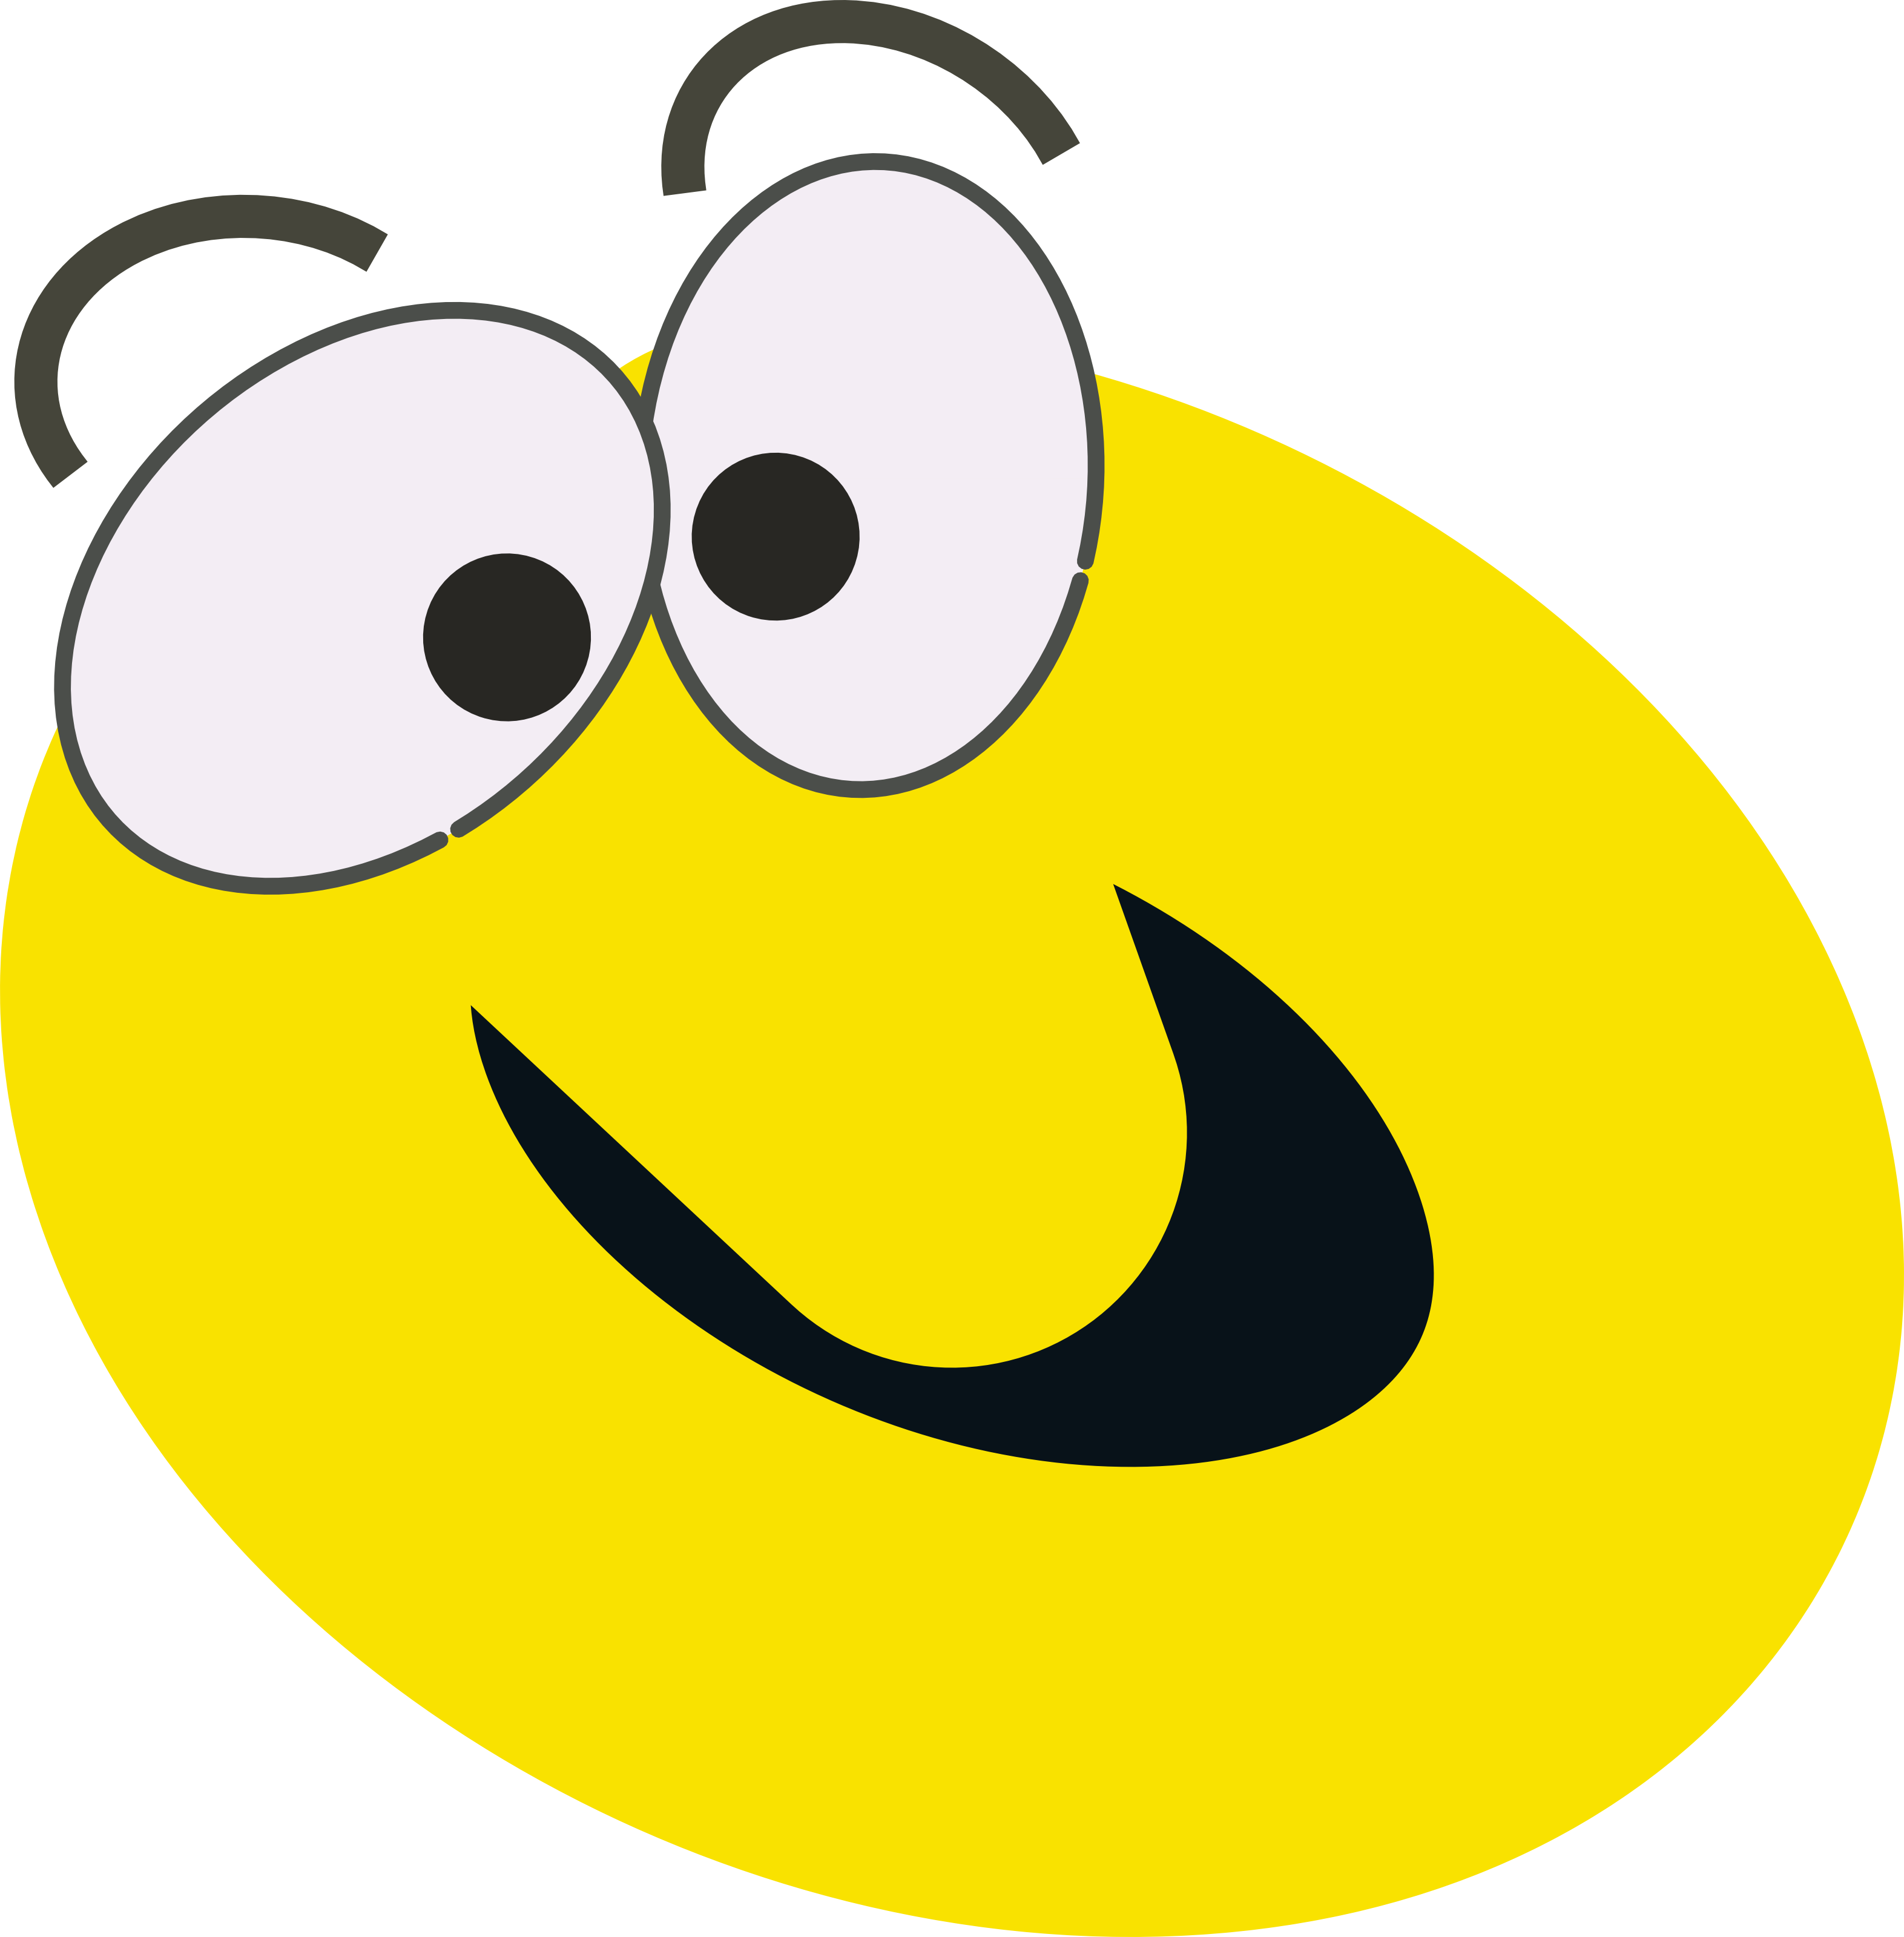 Smiley face clip art animated free clipart images